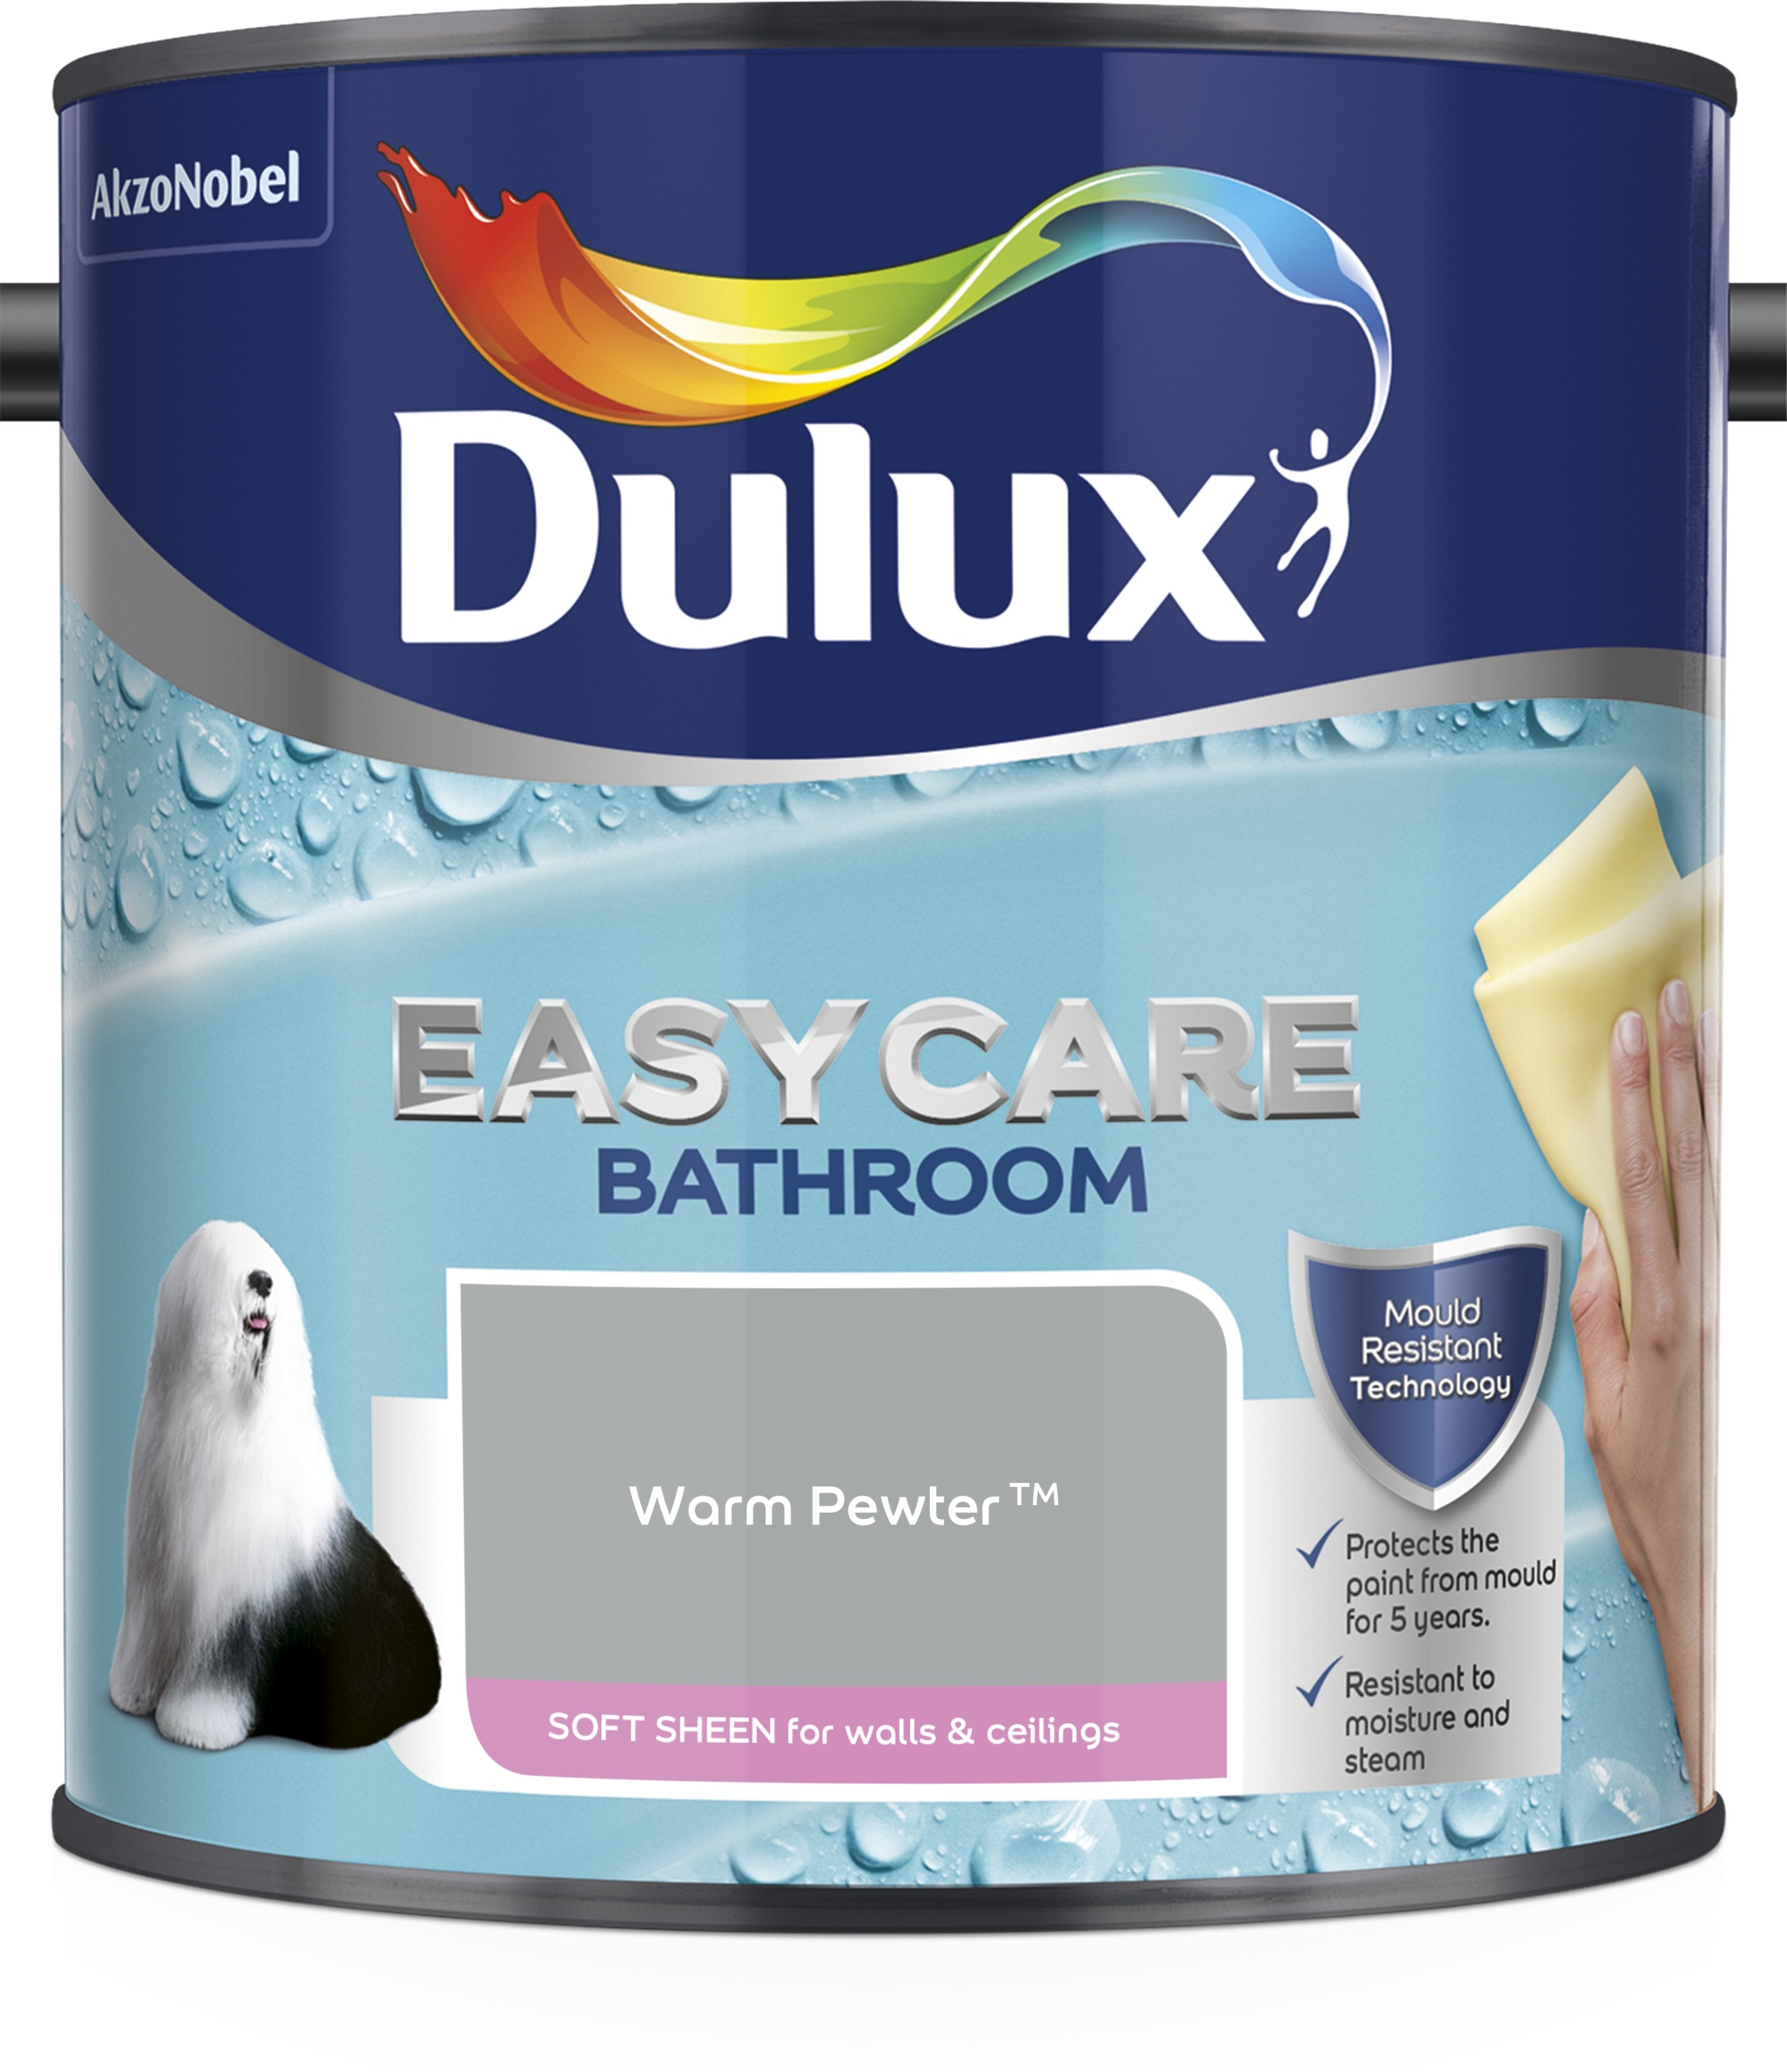 Dulux-Easycare-Bathroom-Soft-Sheen-Emulsion Paint-For-Walls-And-Ceilings-Warm-Pewter-2.5L